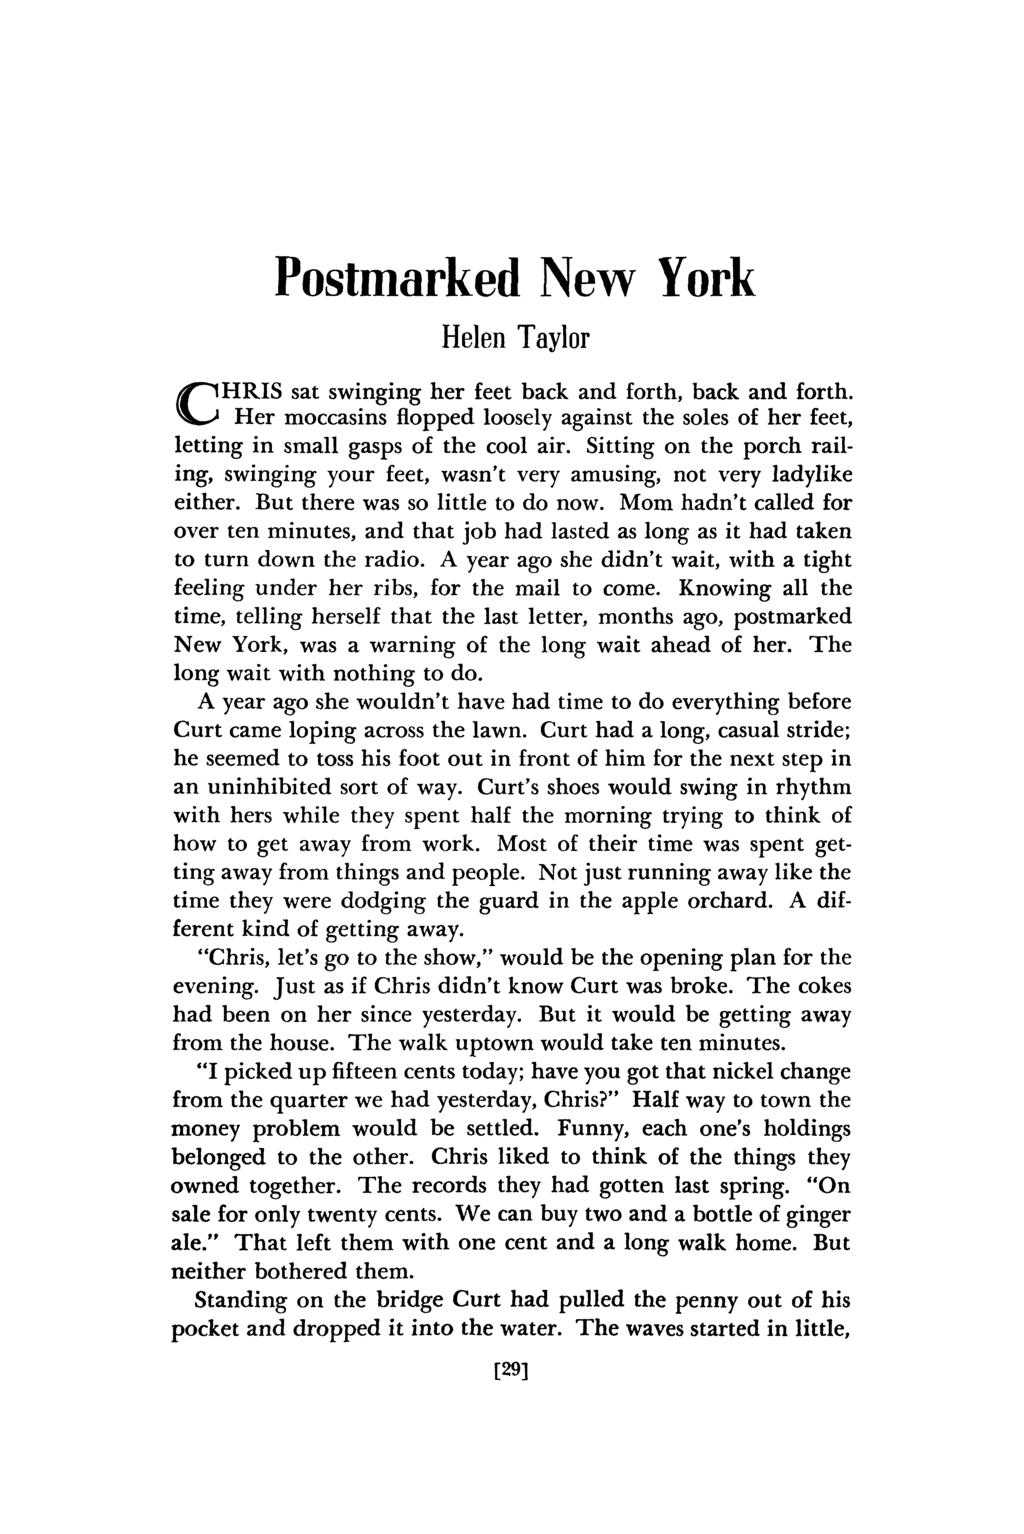 Postmarked New York Helen Taylor CHRIS sat swinging her feet back and forth, back and forth. Her moccasins flopped loosely against the soles of her feet, letting in small gasps of the cool air.